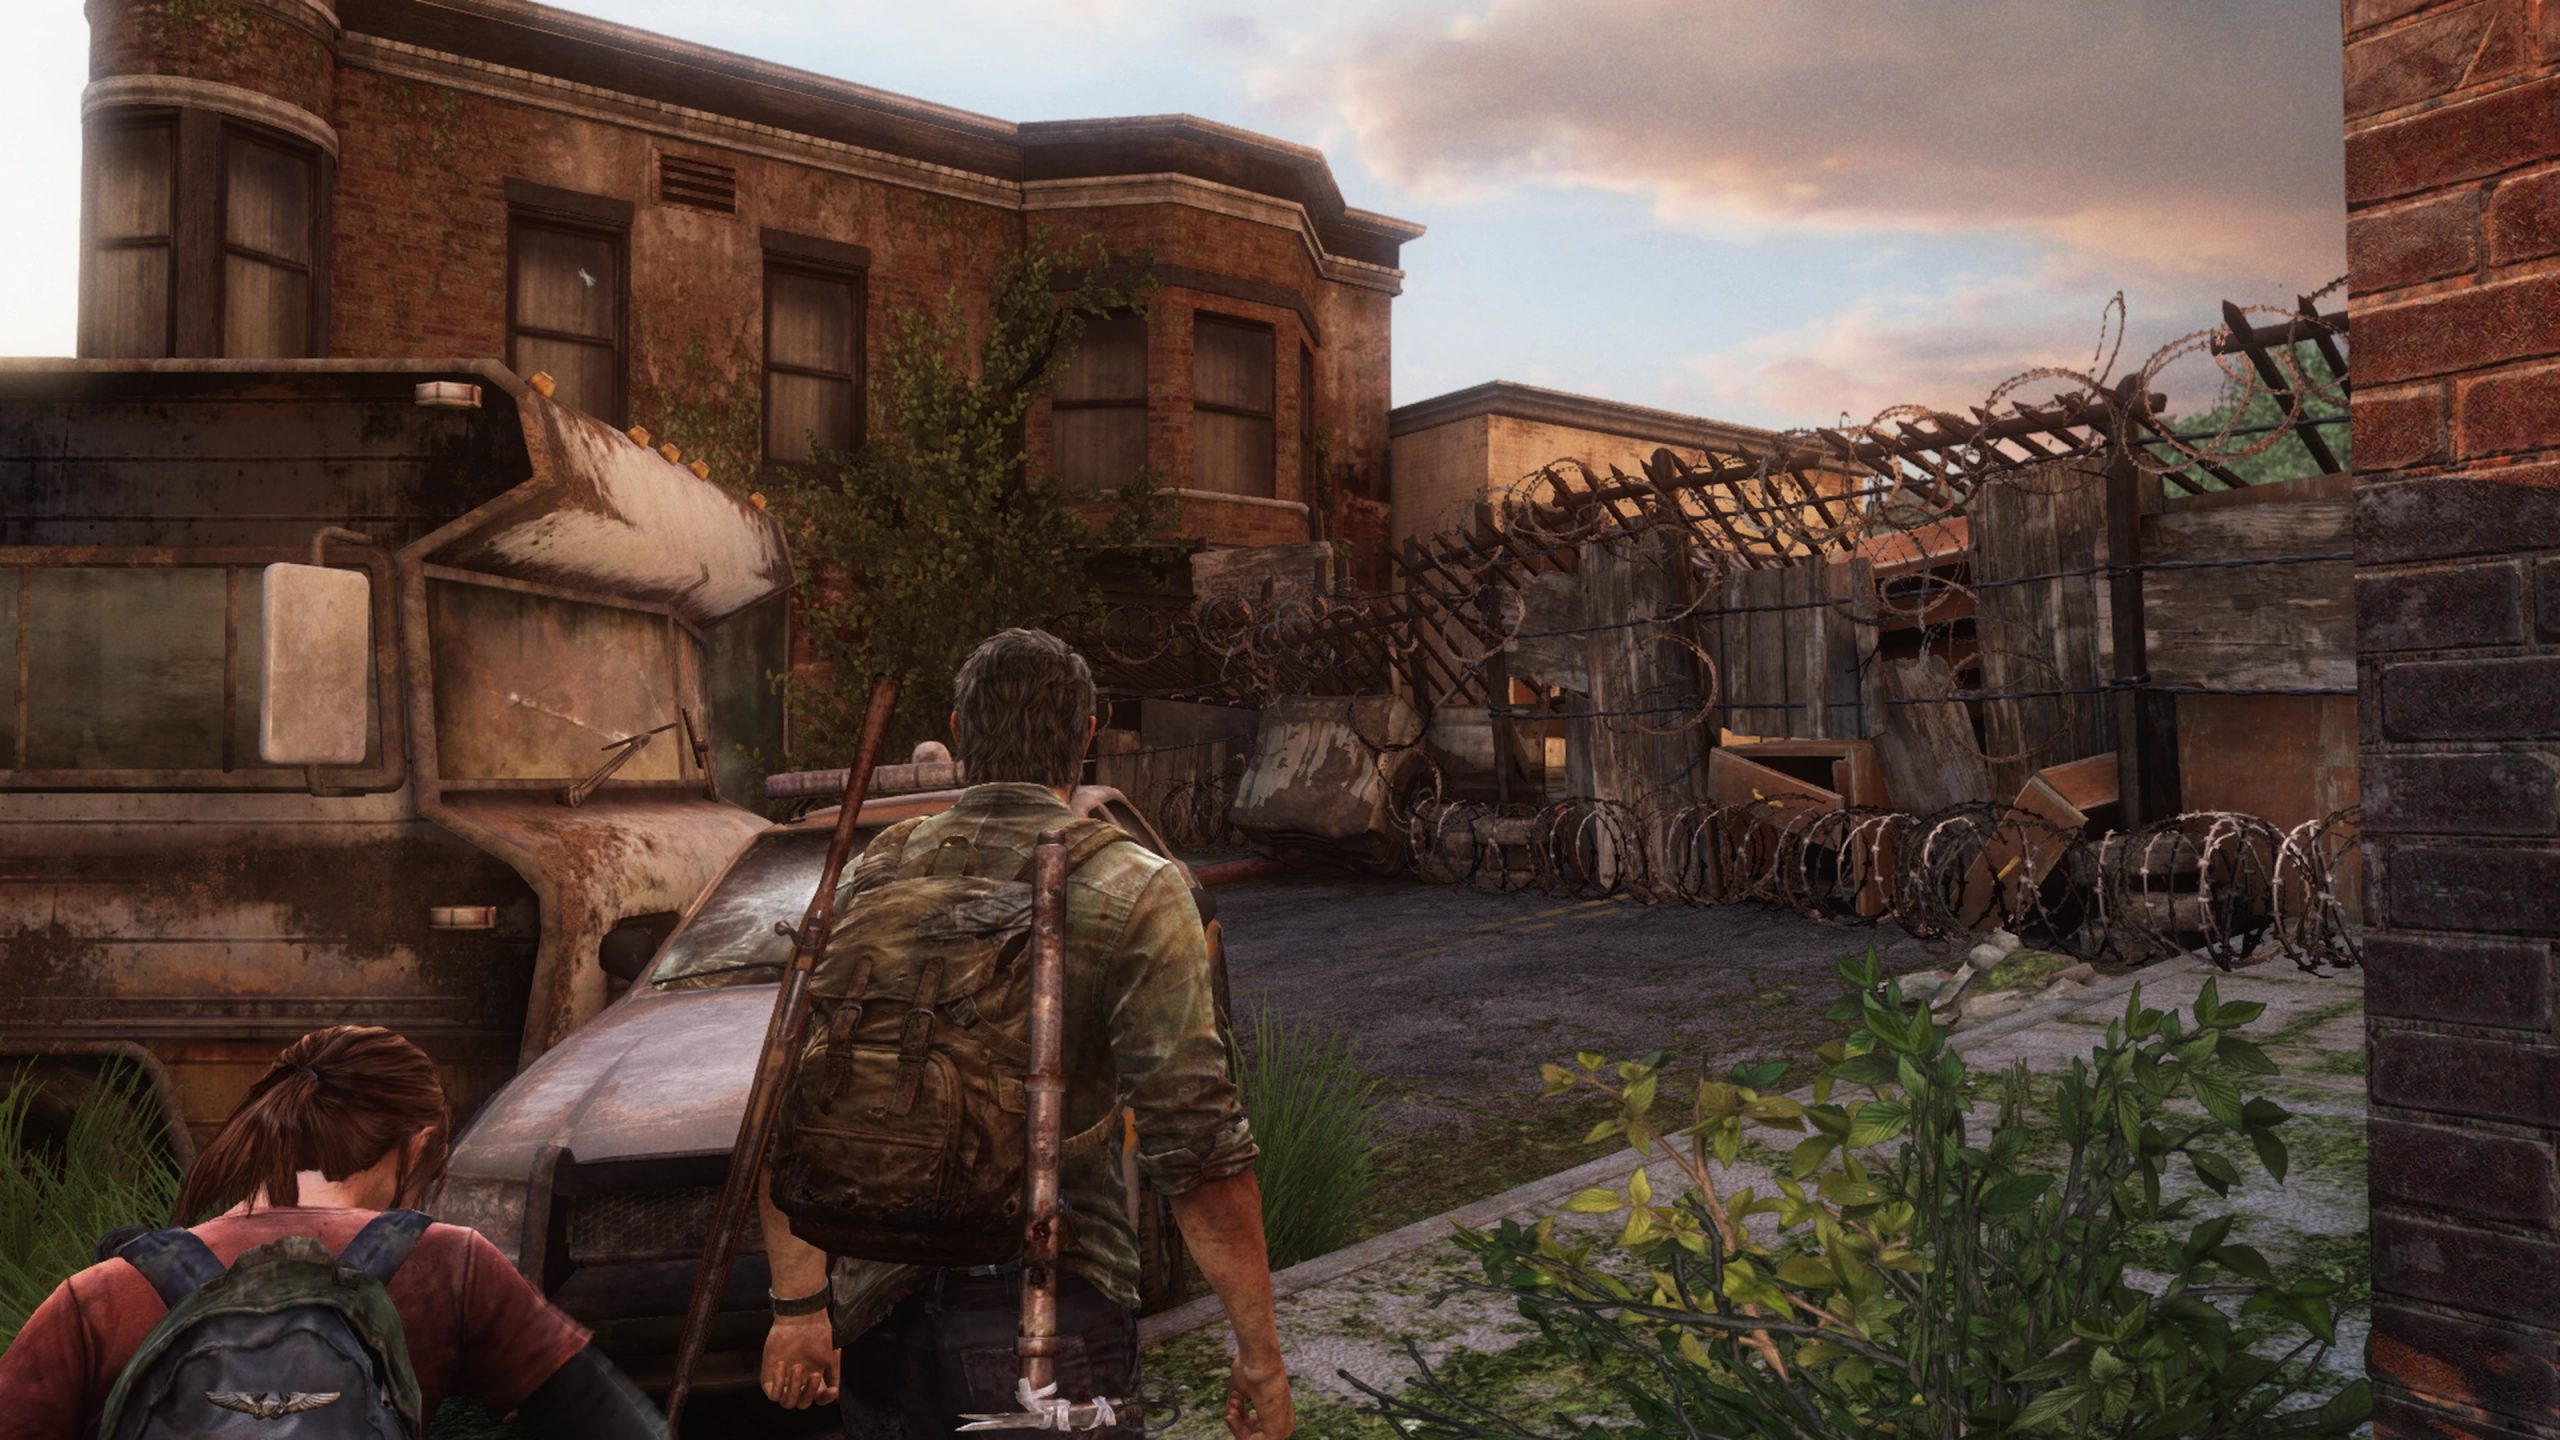 The Last Of Us Episode 3 Recap: The Ballad Of Bill And Frank